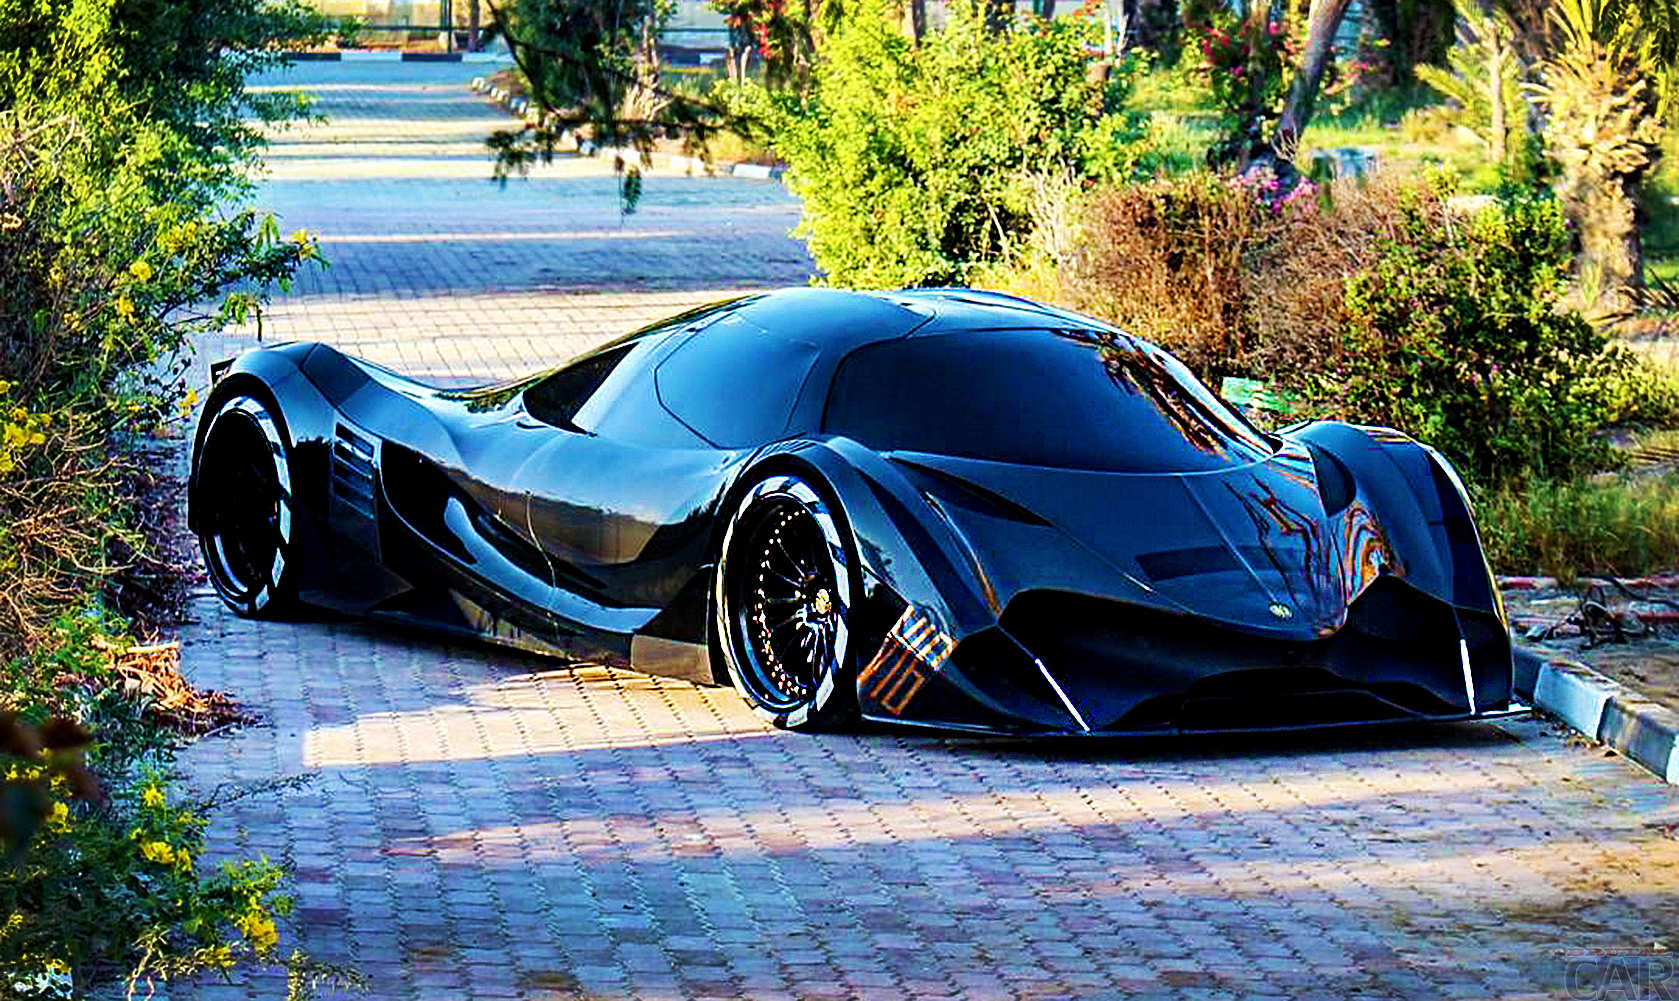 Devel Sixteen Wallpaper Hd Free Download Watch Beautiful Hd Wallpapers Of The Best Cars Of The World